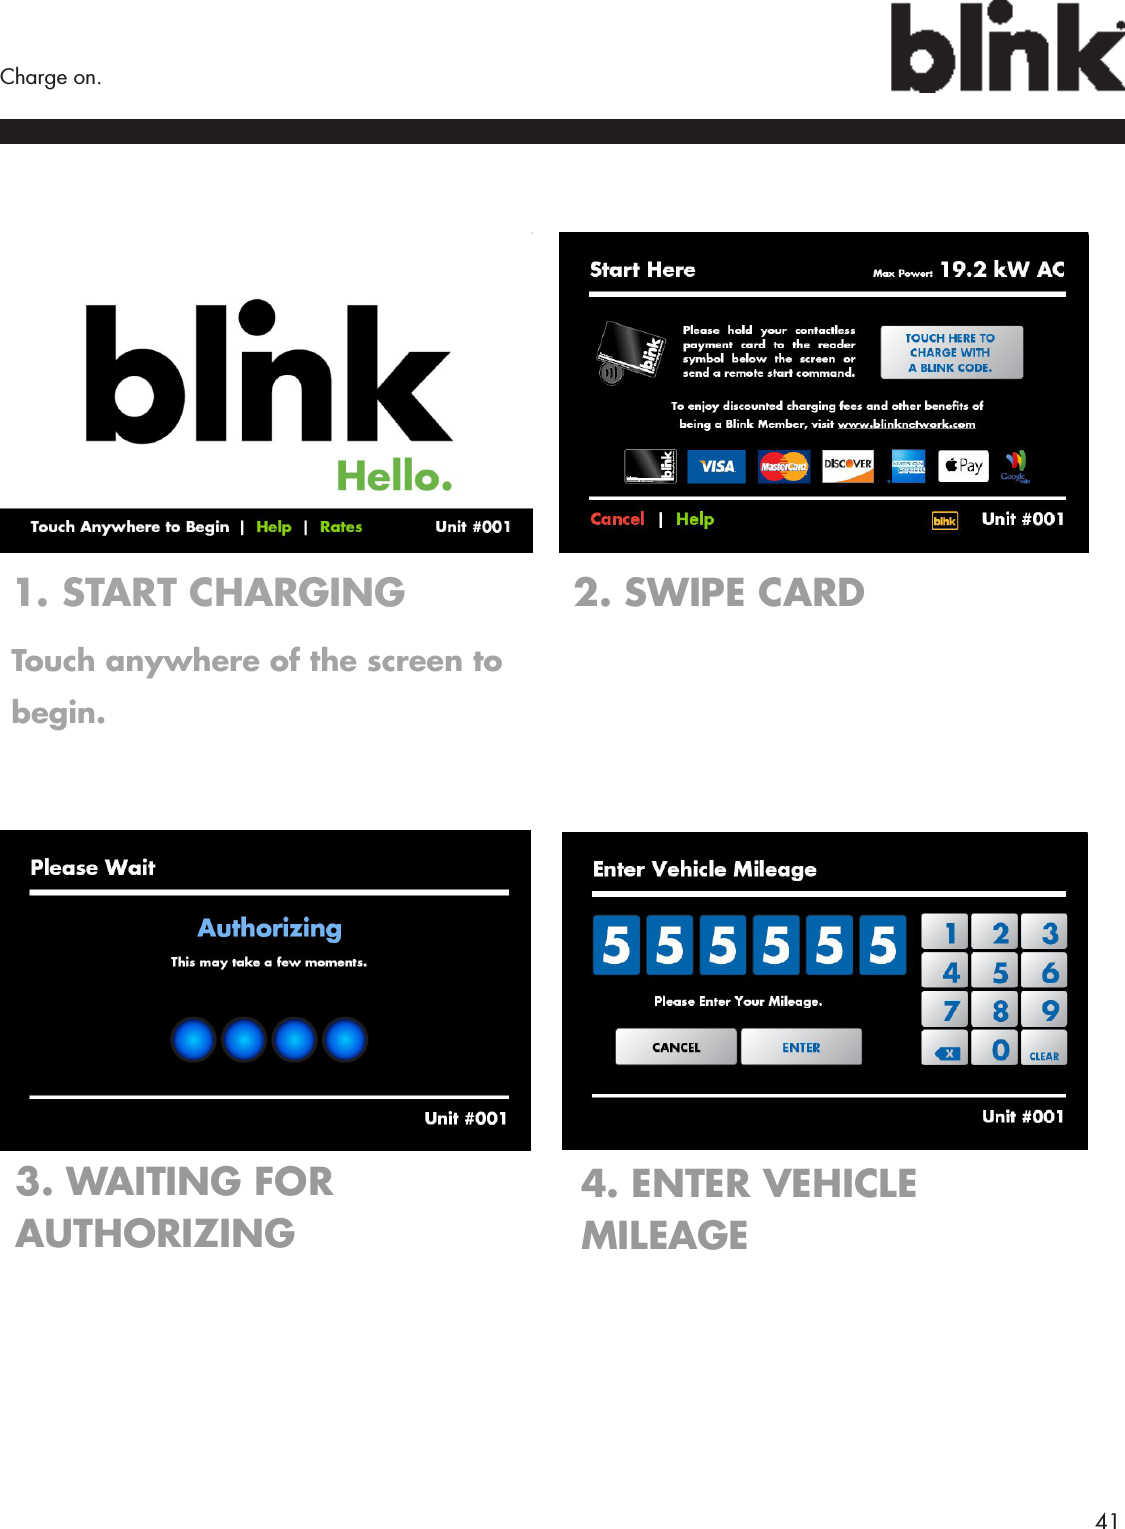        41Charge on.Figure 5-3. Blink Charger screen.2. SWIPE CARD1. START CHARGINGTouch anywhere of the screen to begin.4. ENTER VEHICLE MILEAGE3. WAITING FOR AUTHORIZING